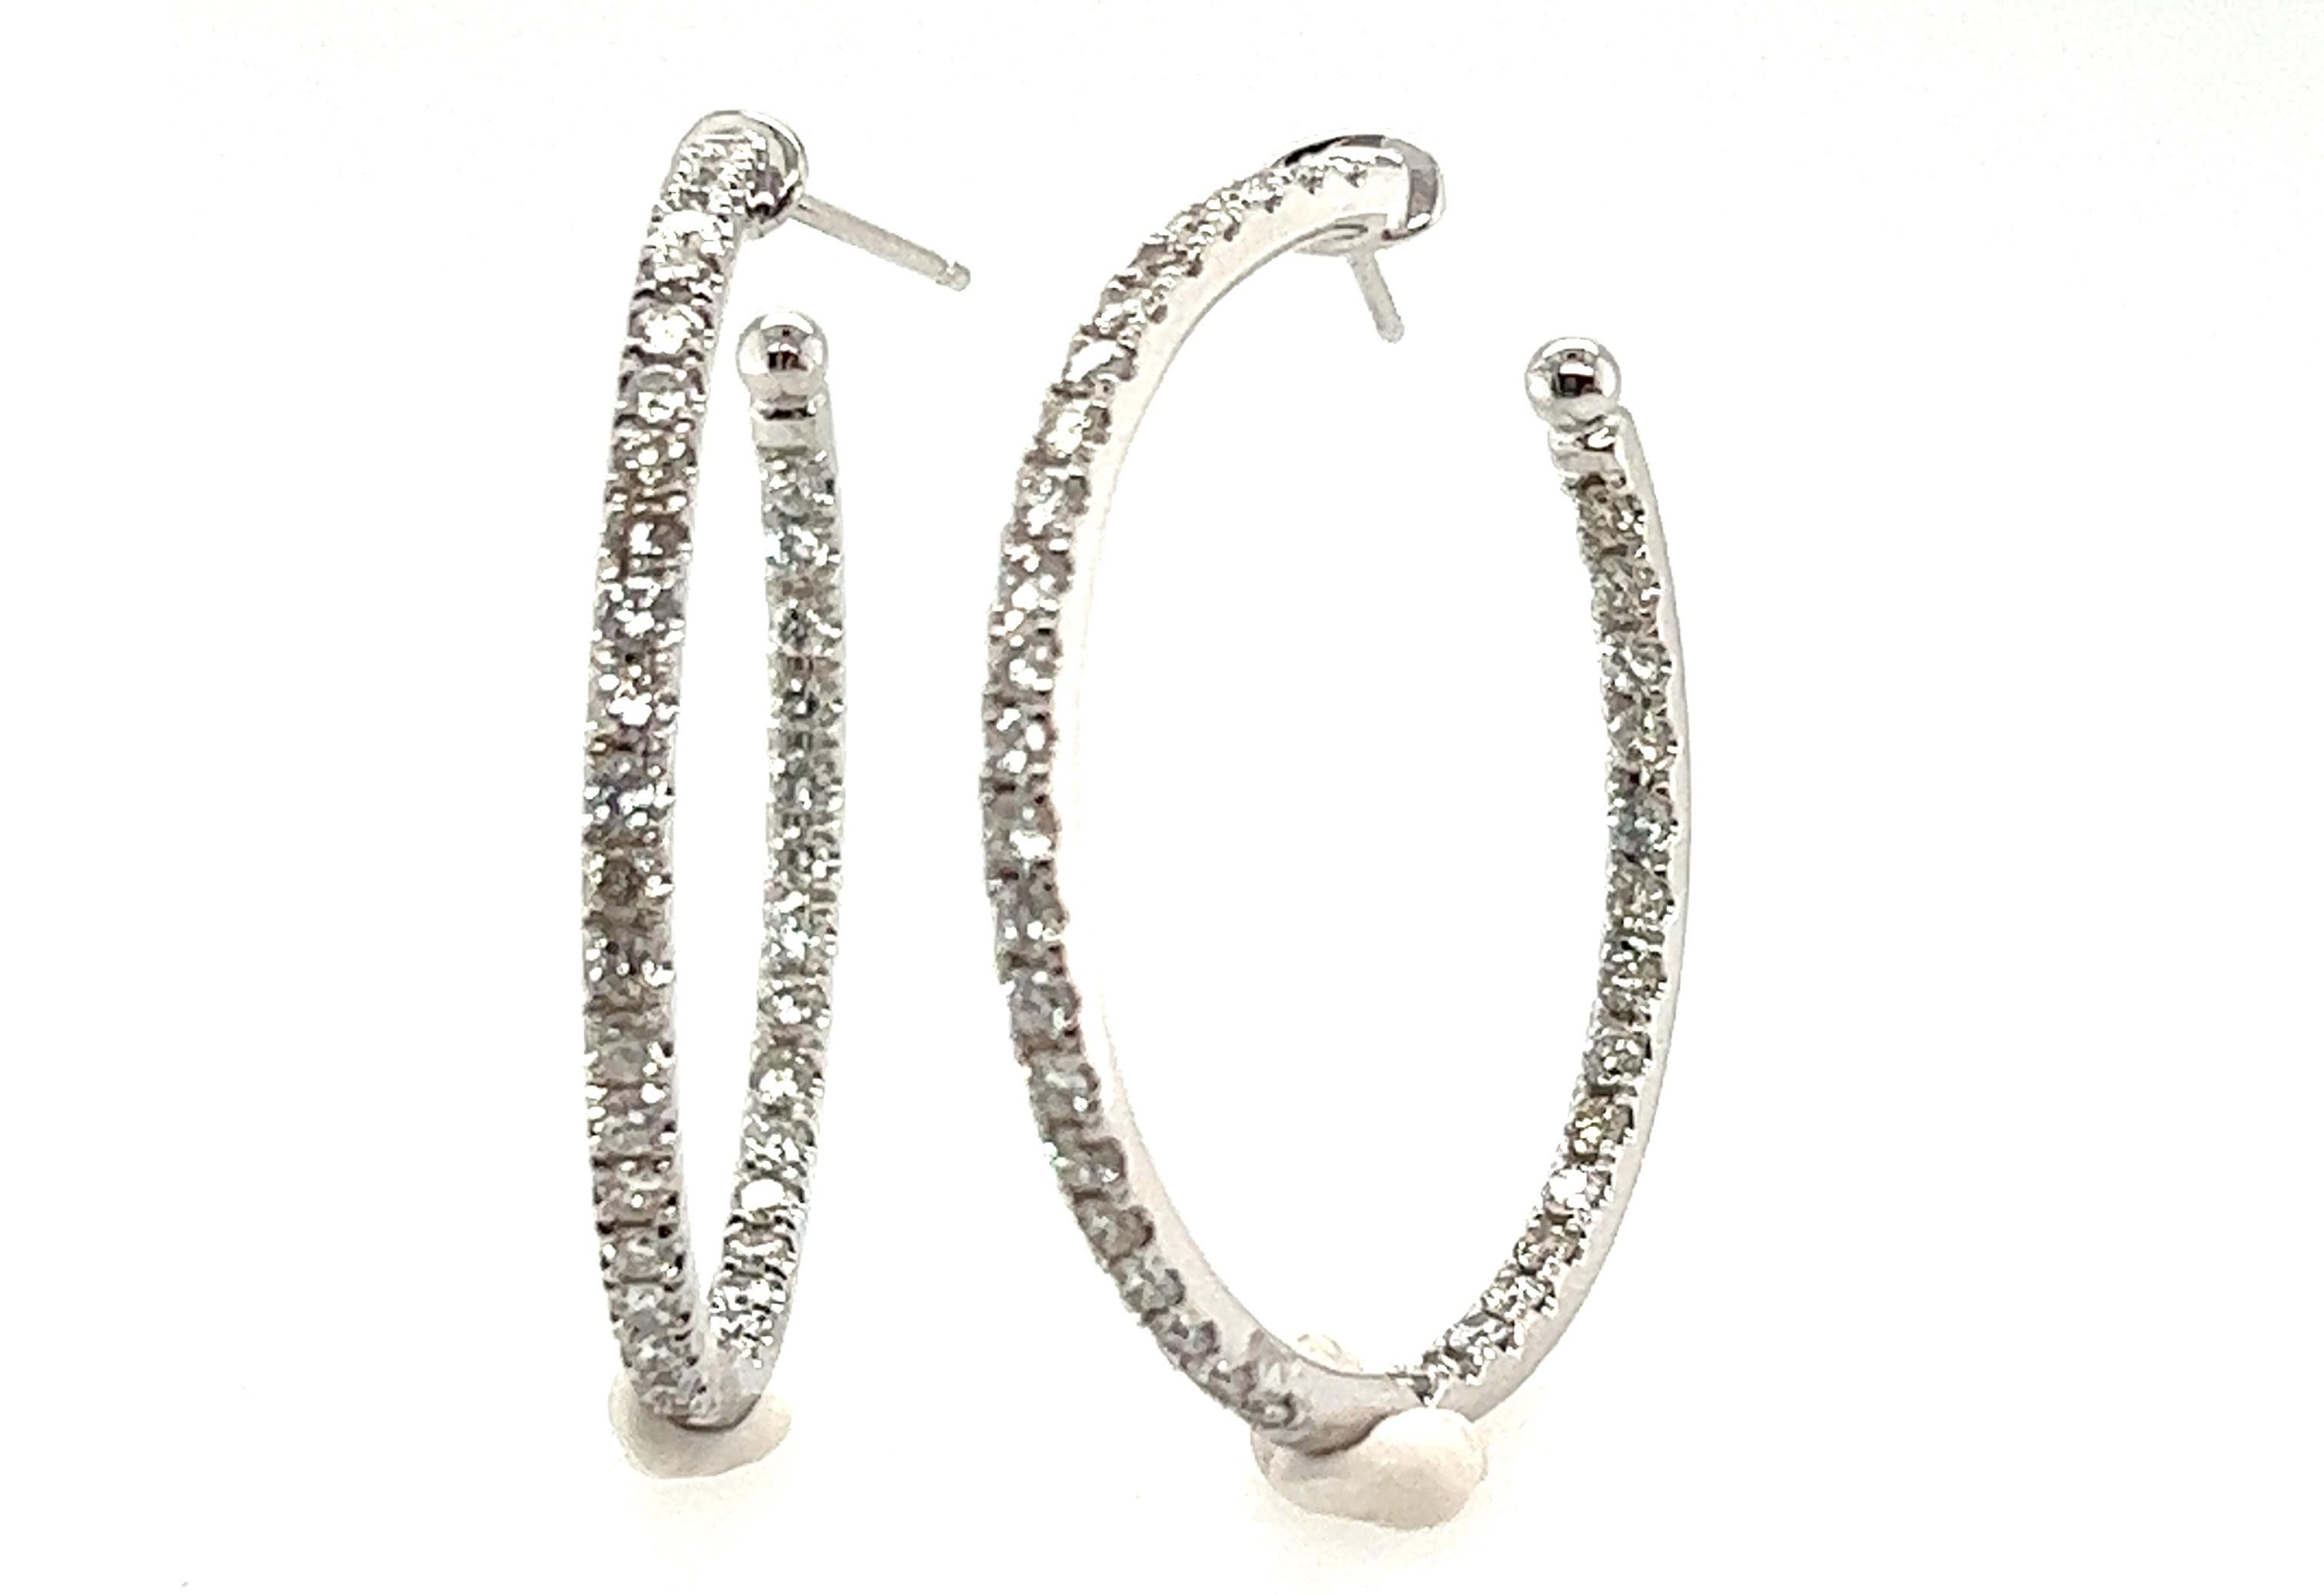 Brand New Diamond Hoop Earrings 1.96cttw 14K White Gold


Featuring 74 Genuine Natural G-H/VS-SI Round Brilliant Diamonds

Clean and Colorless Diamonds

Absolutely Stunning

Getting that 2ct Total Weight look for less

100% Natural Diamonds

1.96